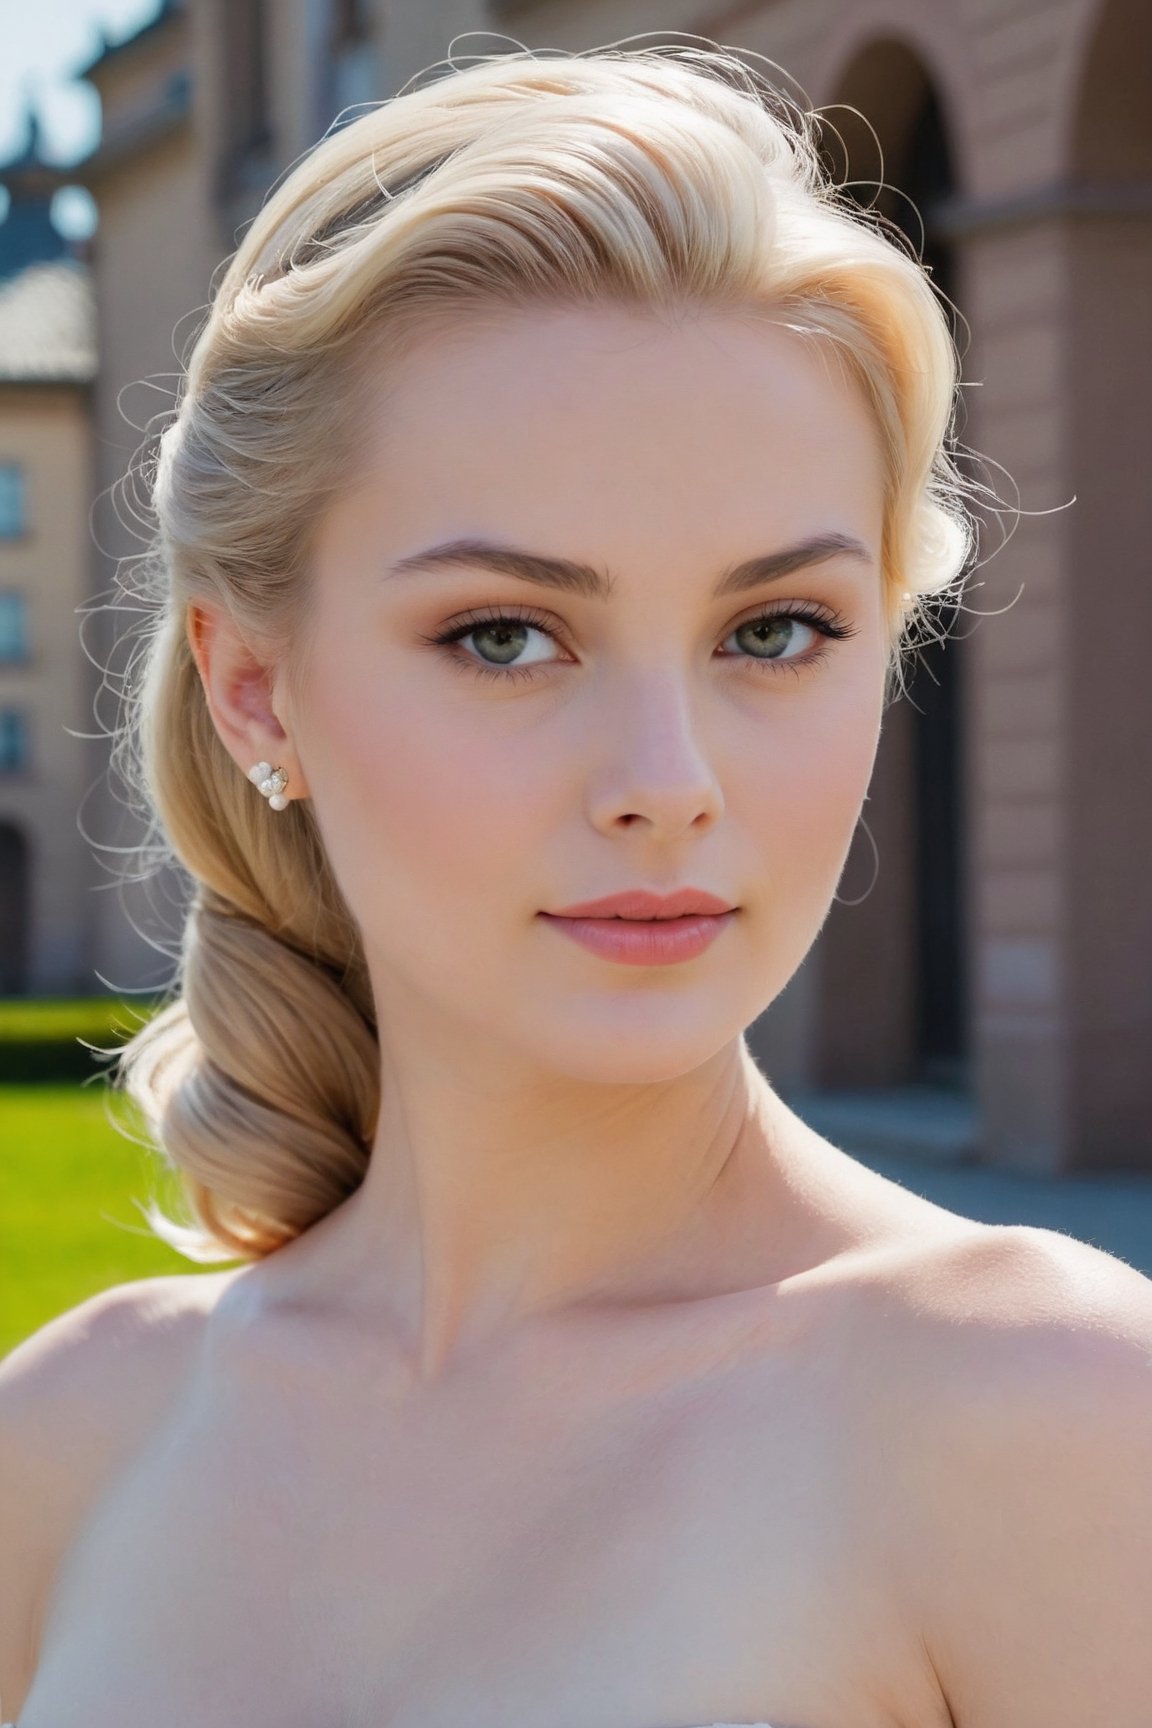 headshot,Nudity,Naked,Nude,No Clothes,White-blonde hair,face similar to Grace Kelly,Russian,pale skin,Pony tail Hairstyle,Luminous skin makeup,21 year old,Boyish_normal_breasts,headshot,Sunny Day Spring,Posing for a photo
